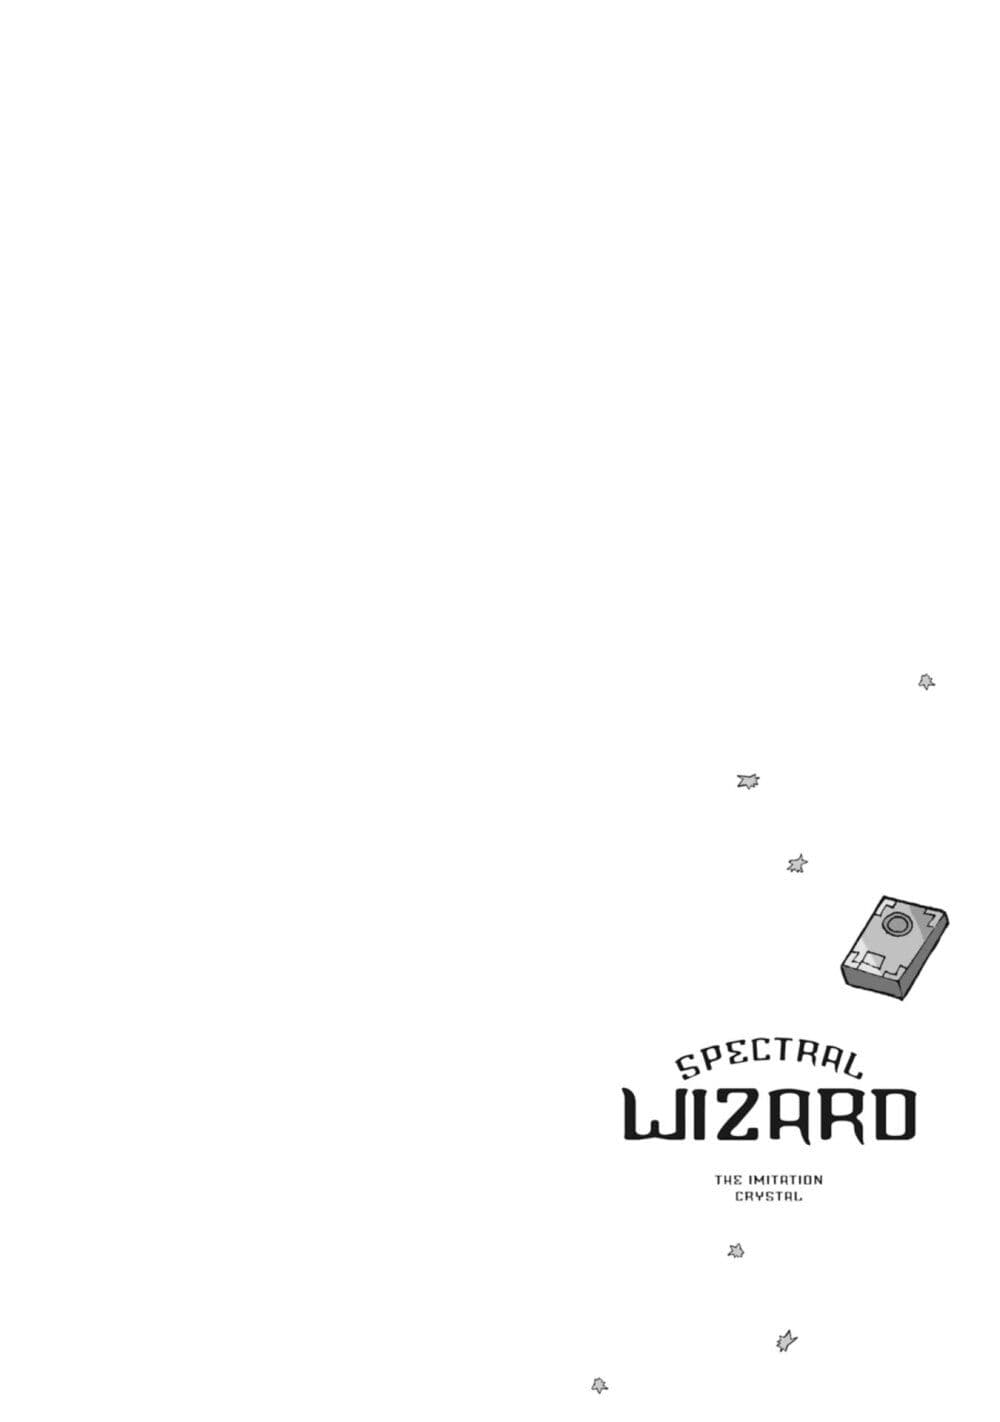 Spectral Wizard 1.5 16